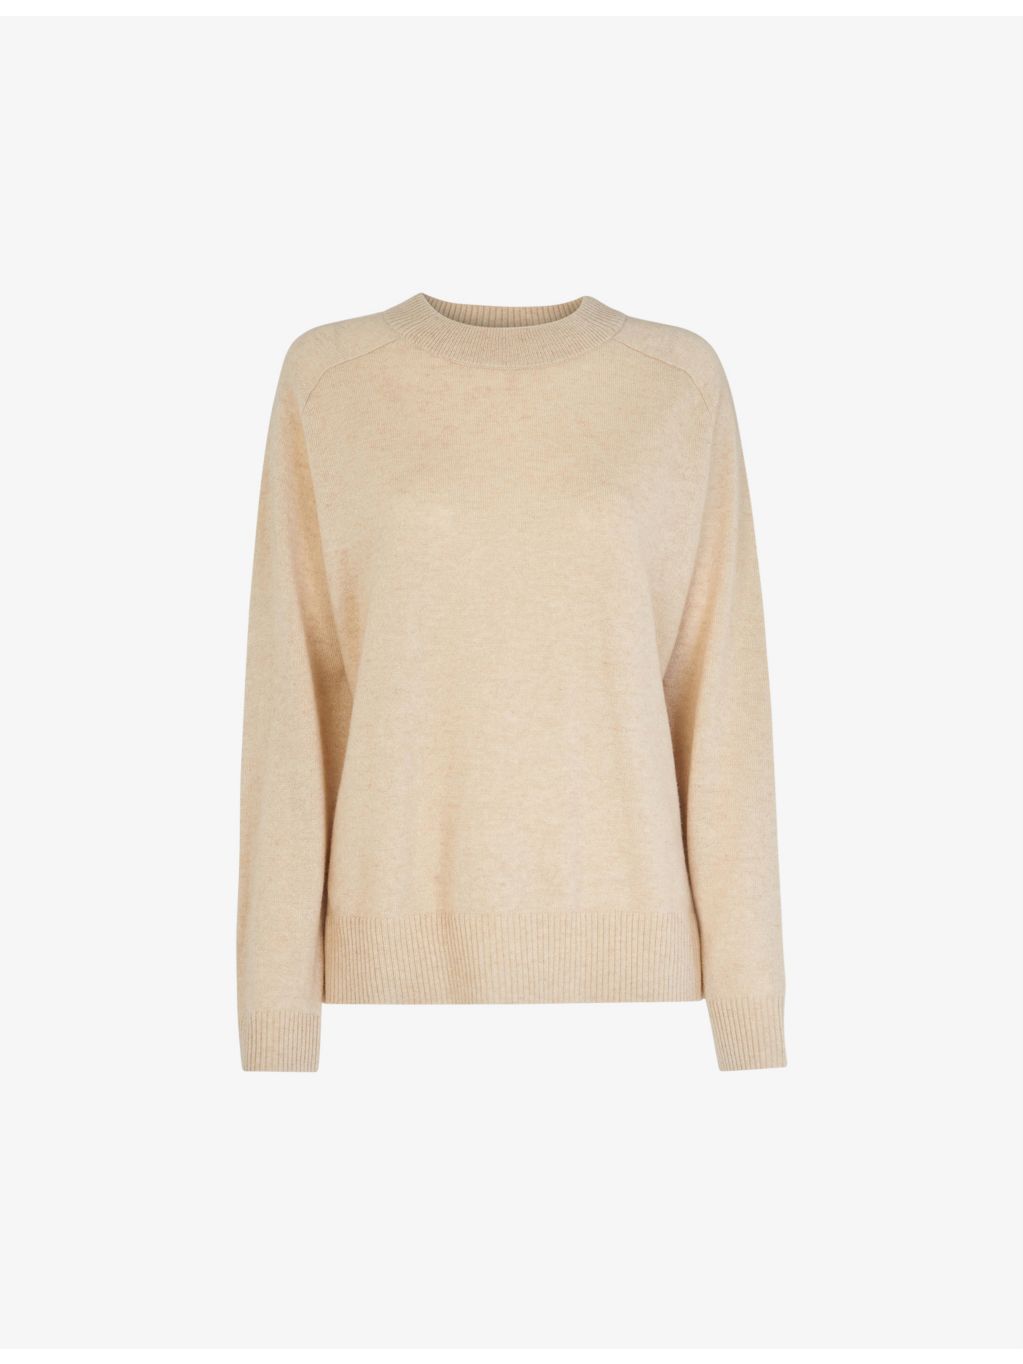 WHISTLES - Crewneck knitted cashmere jumper